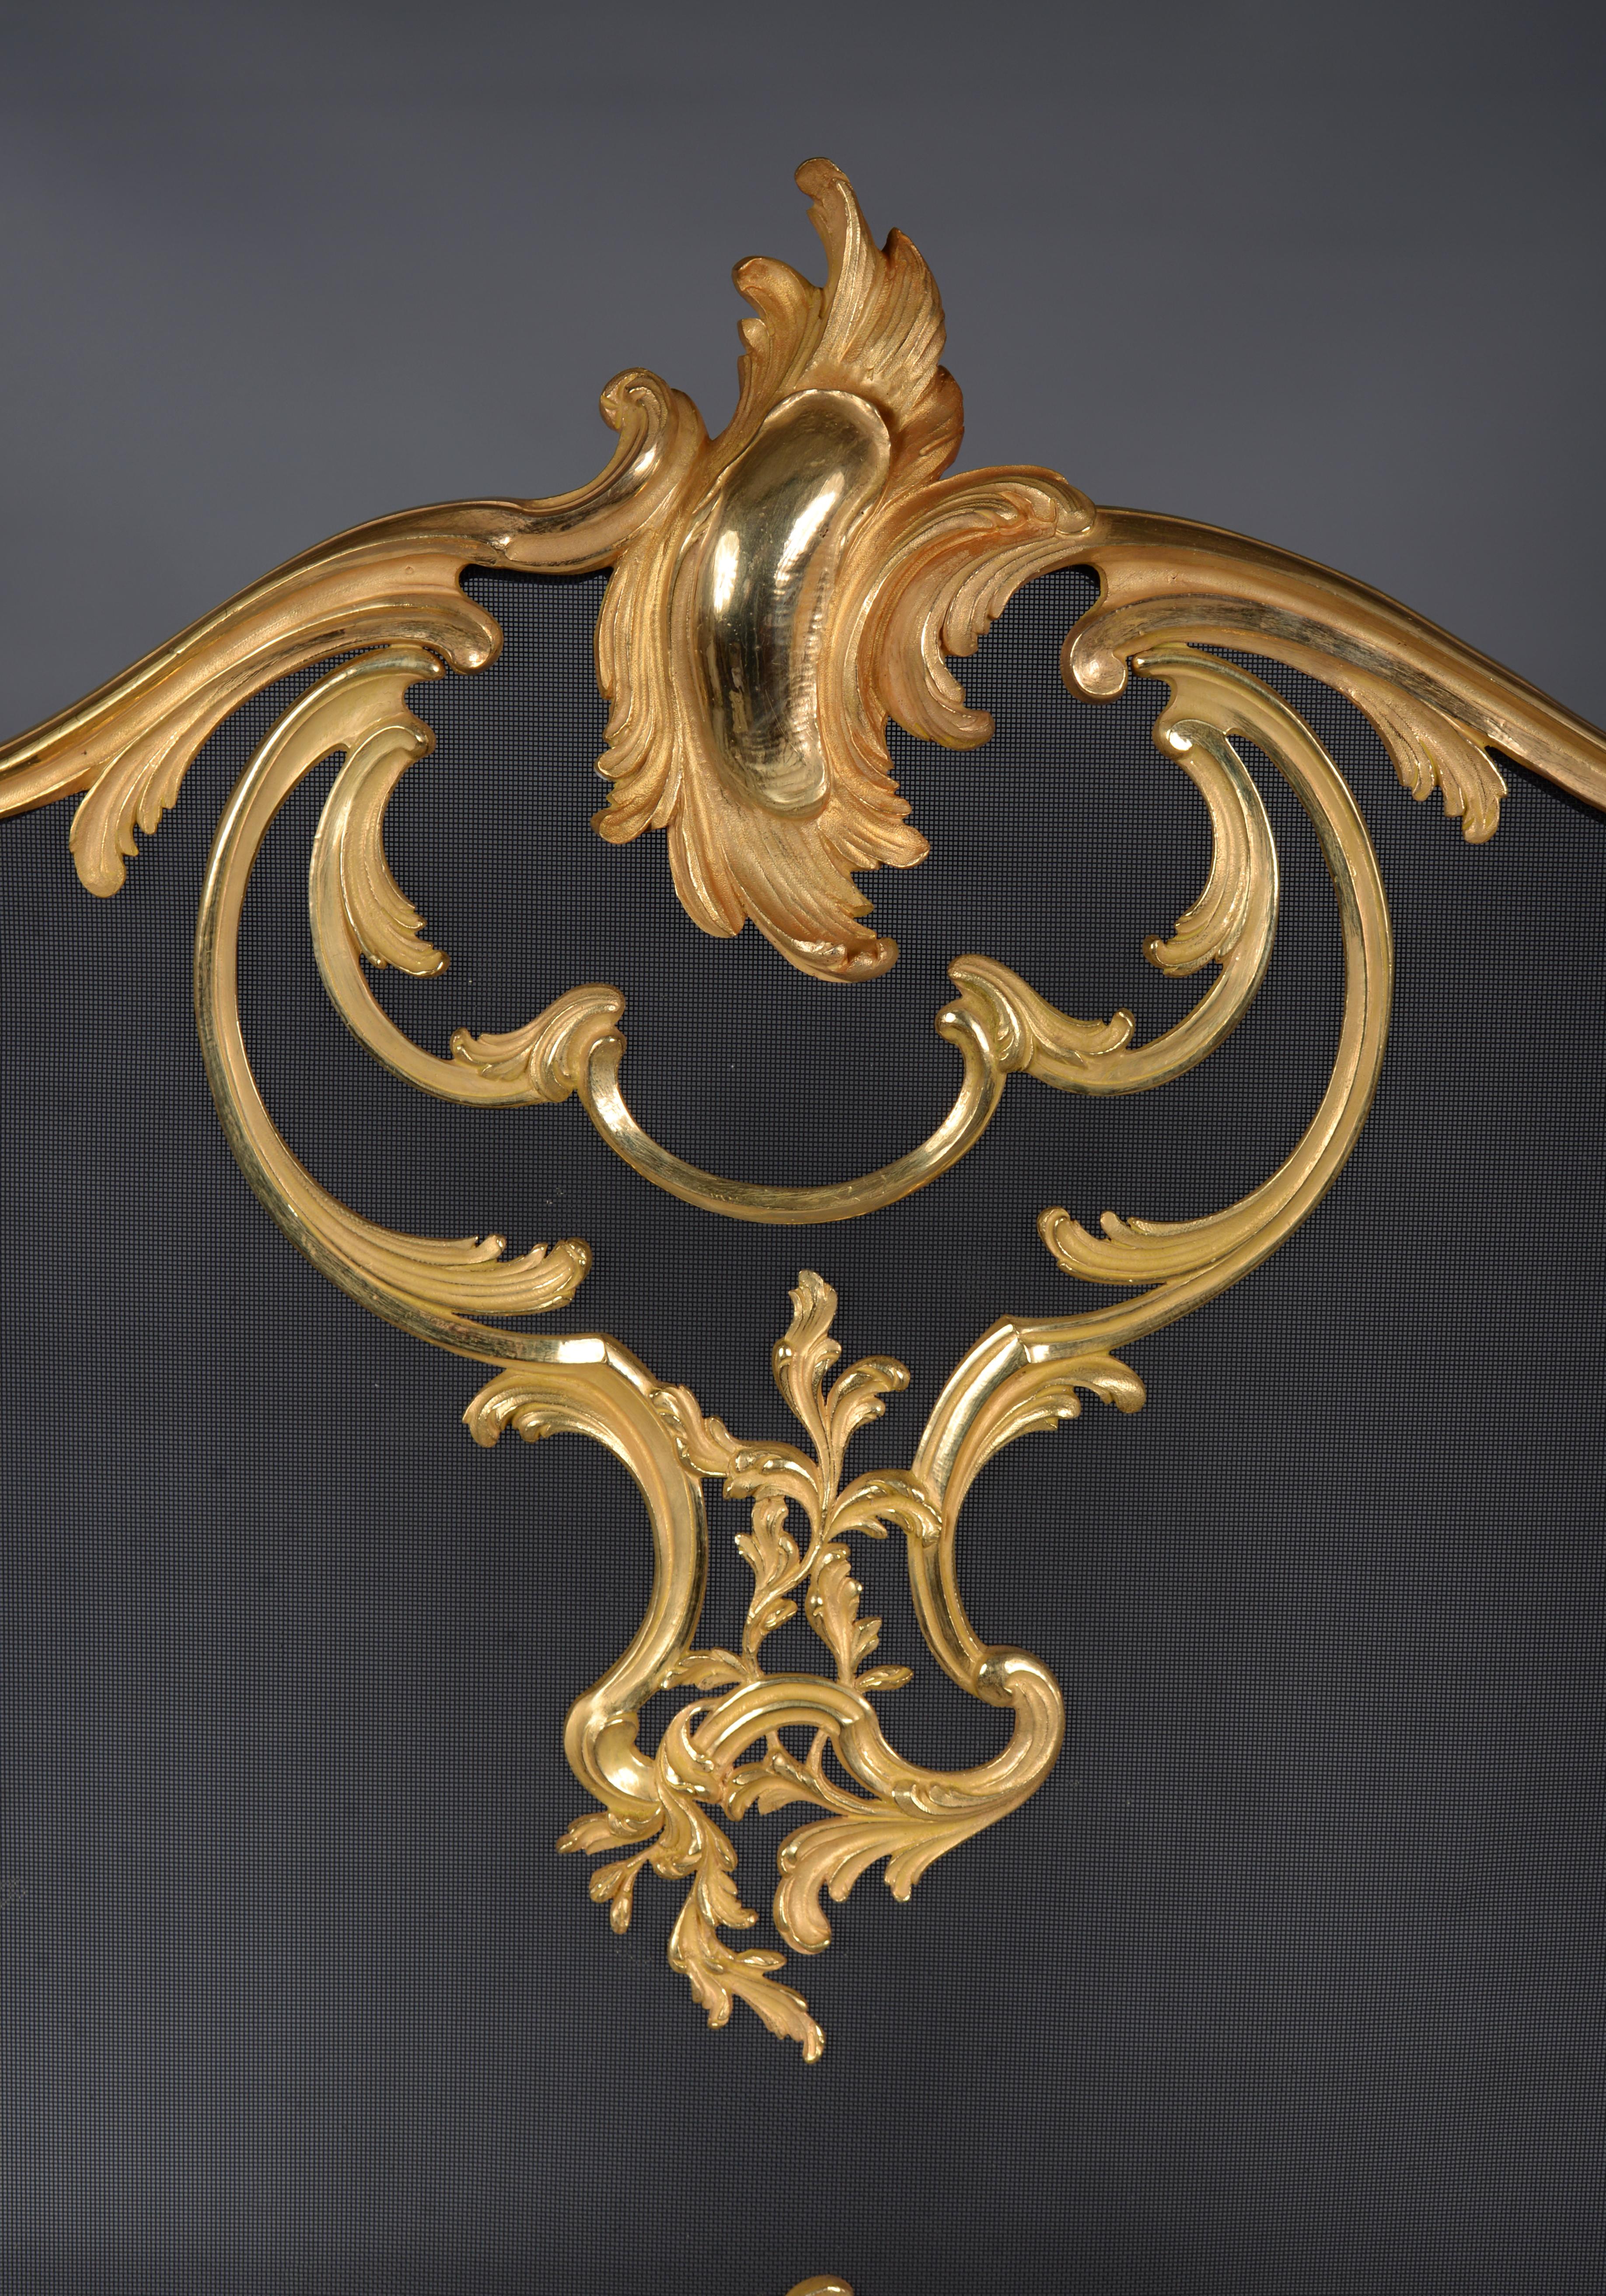 This beautiful gilded bronze fire screen is a re-edition of a model presented at the 1900 World's Fair by the great specialist in fireplace accessories, Bouhon Frères. Taking up the curved lines of the Louis XV style, our fire screen is decorated